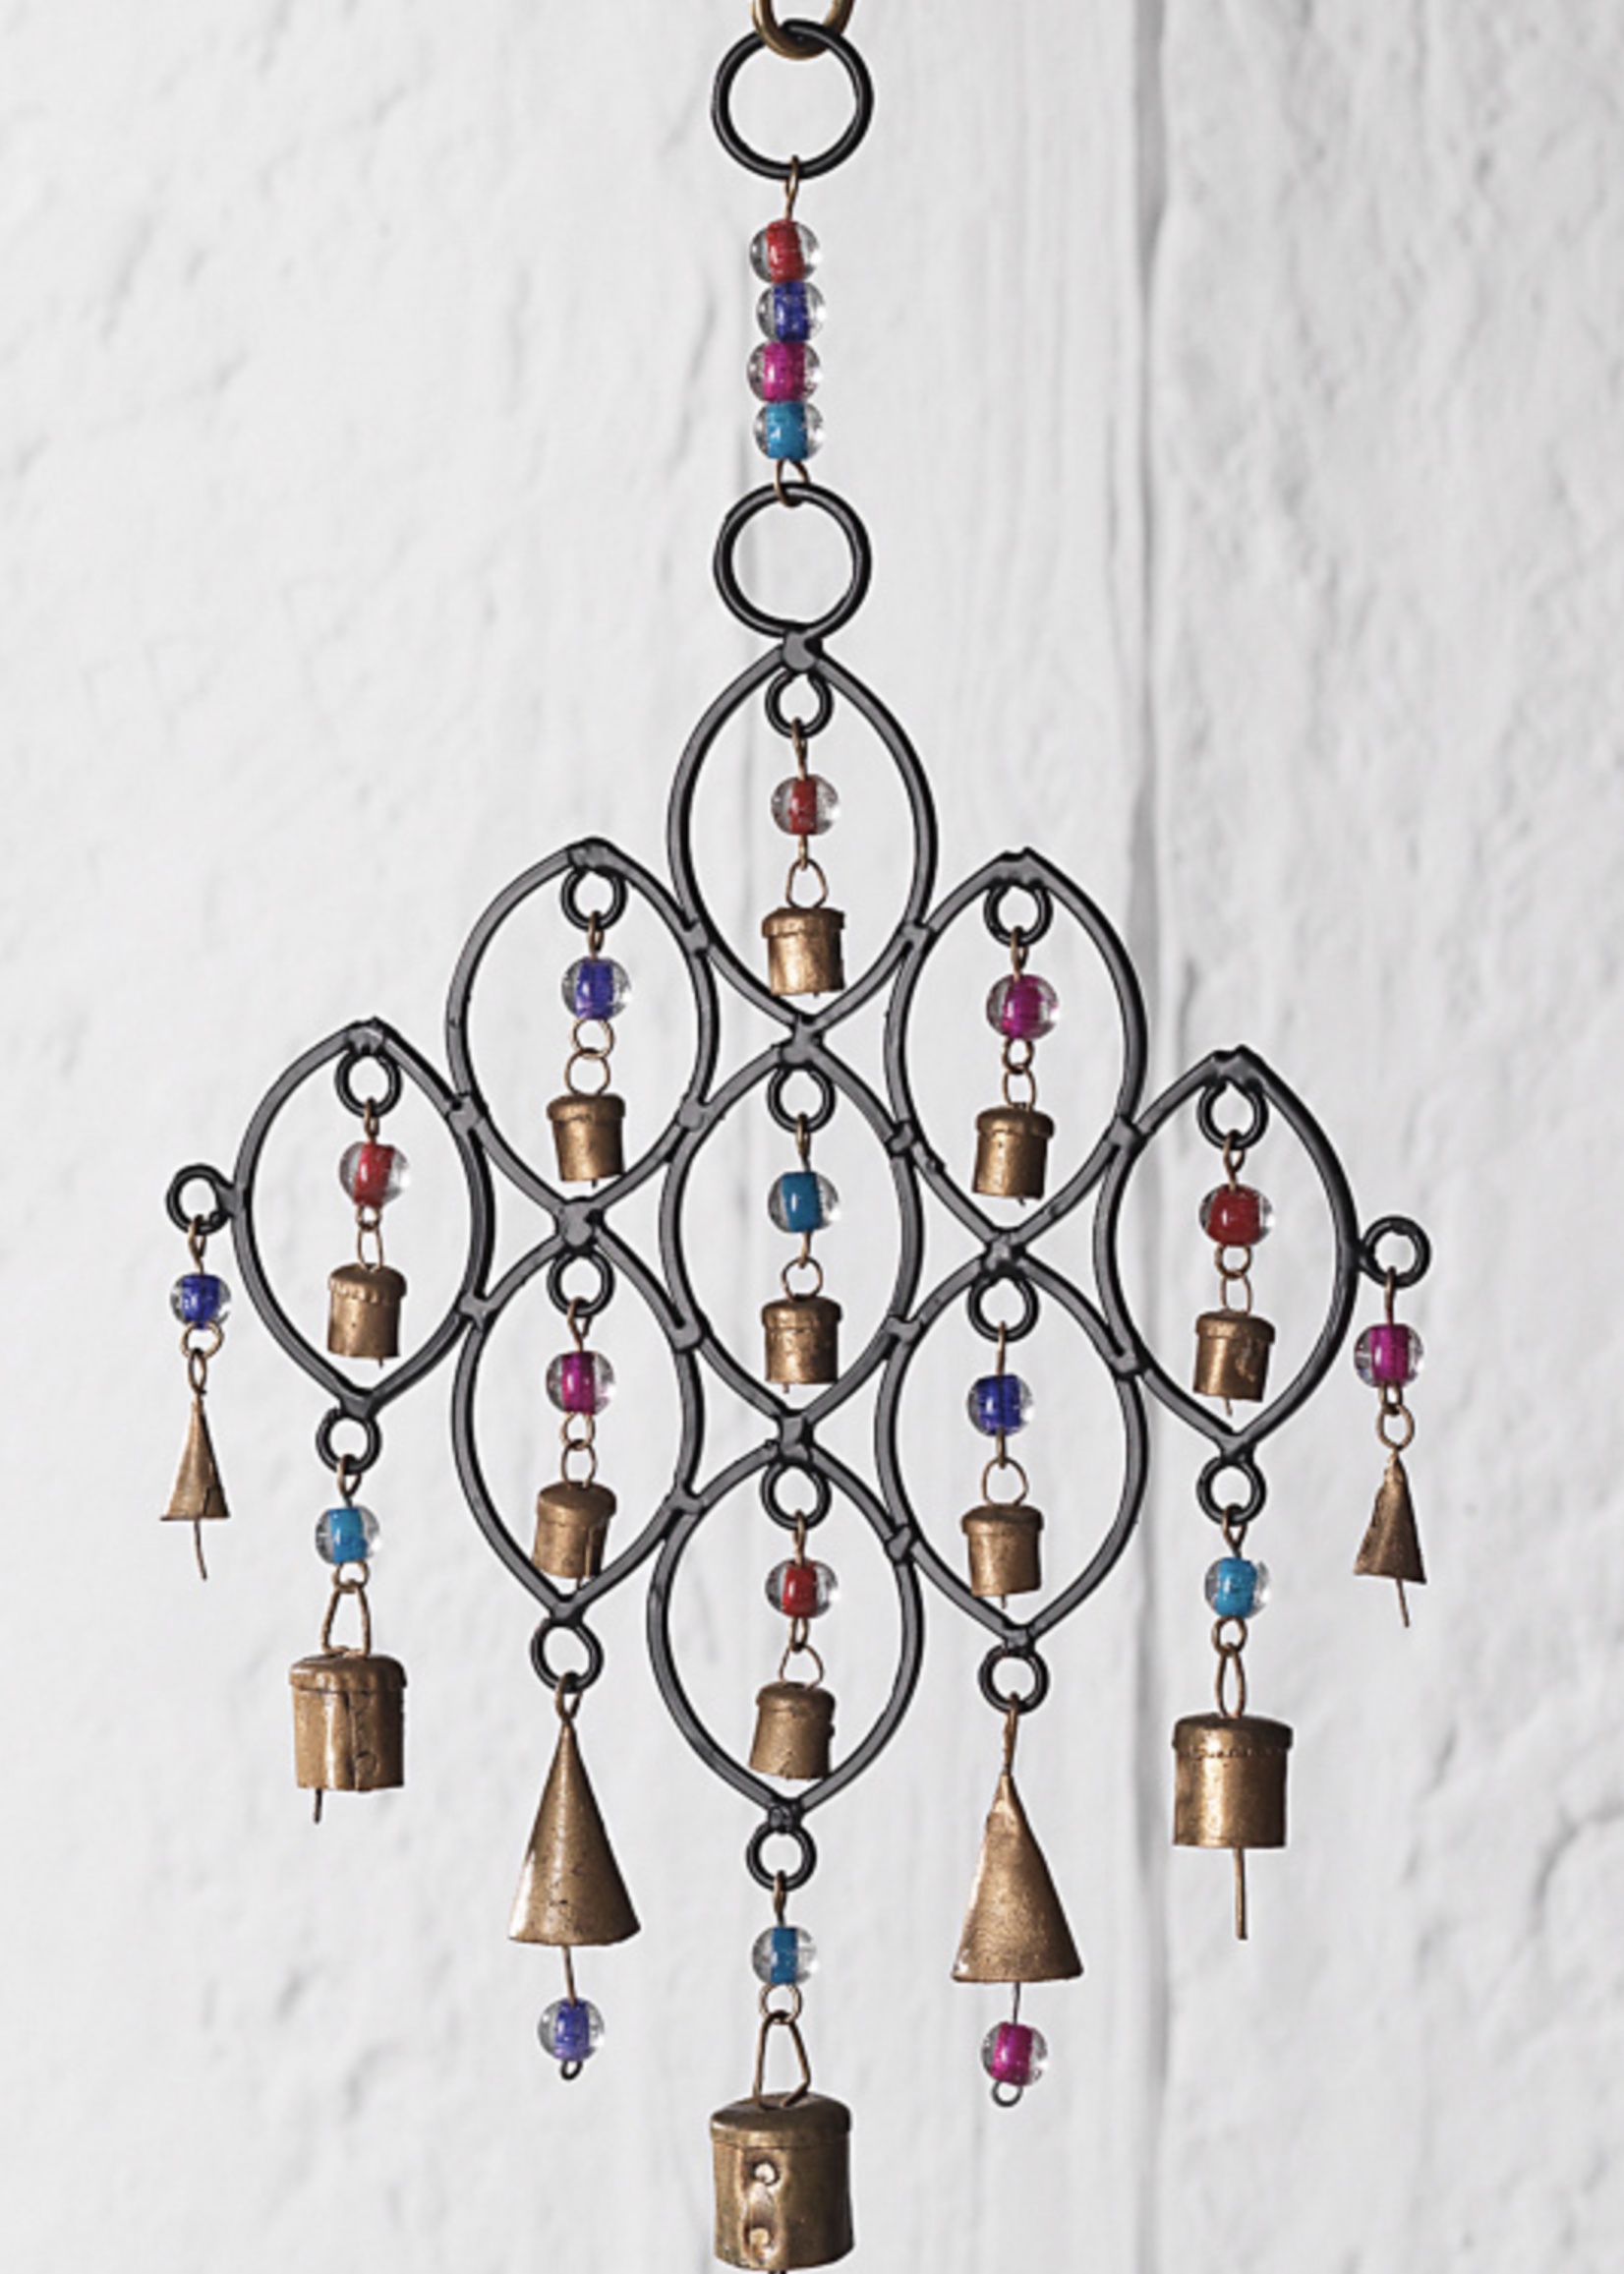 Namaste Recycled Iron Wind Chime With Bells and Beads